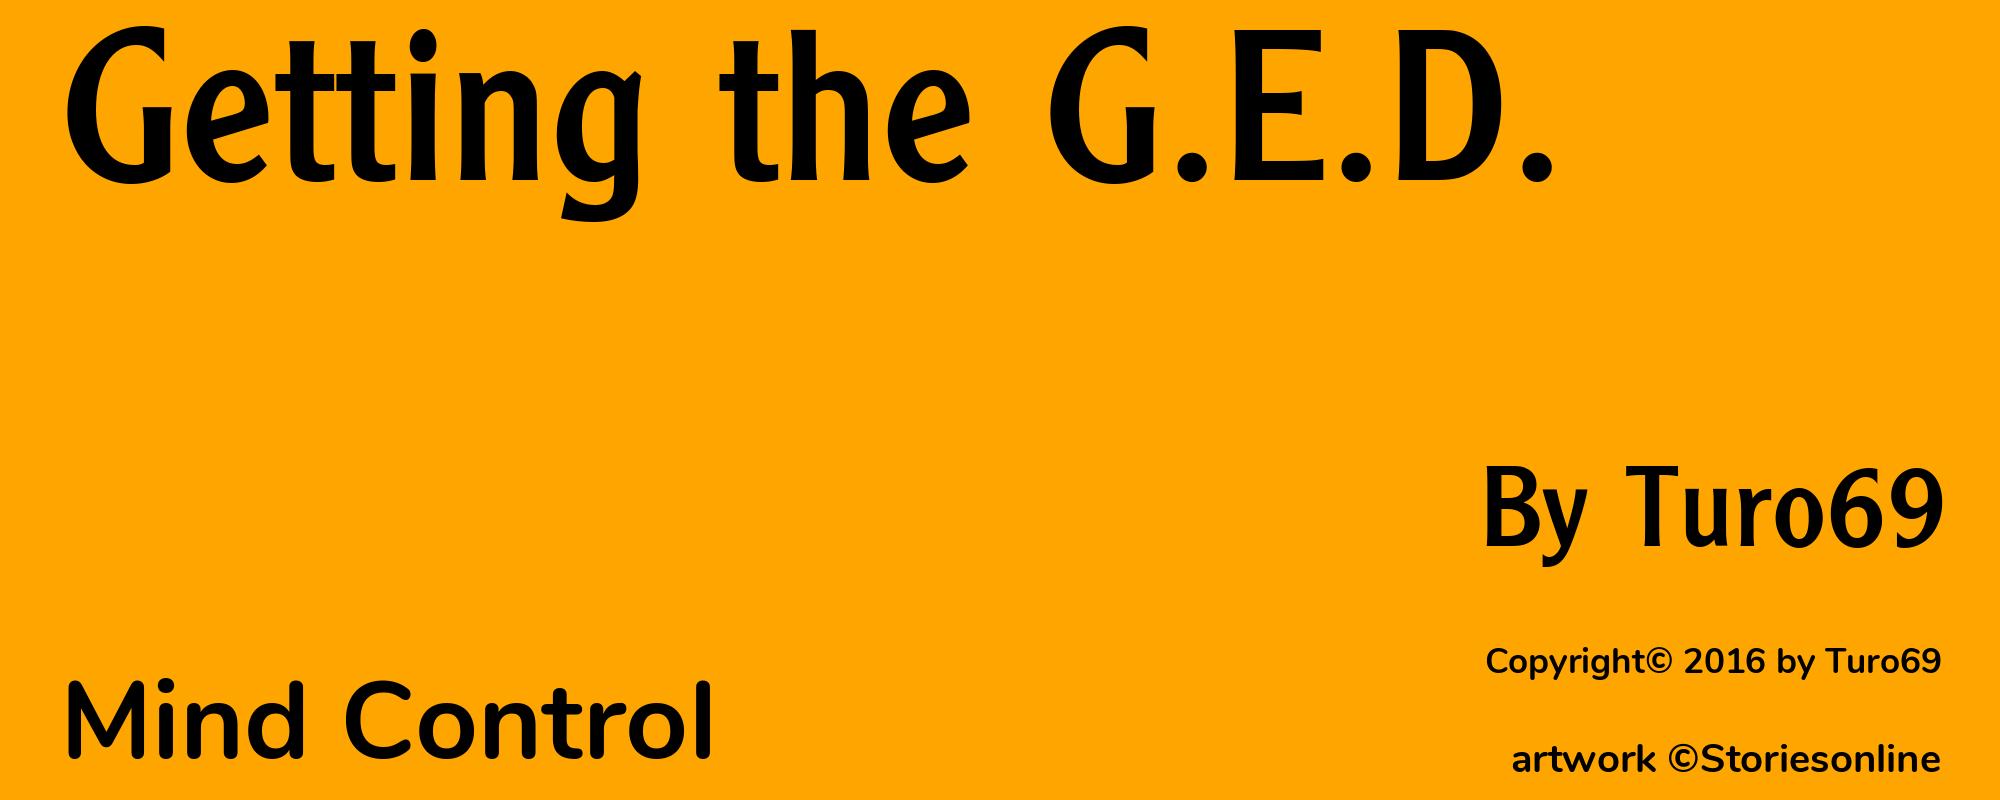 Getting the G.E.D. - Cover